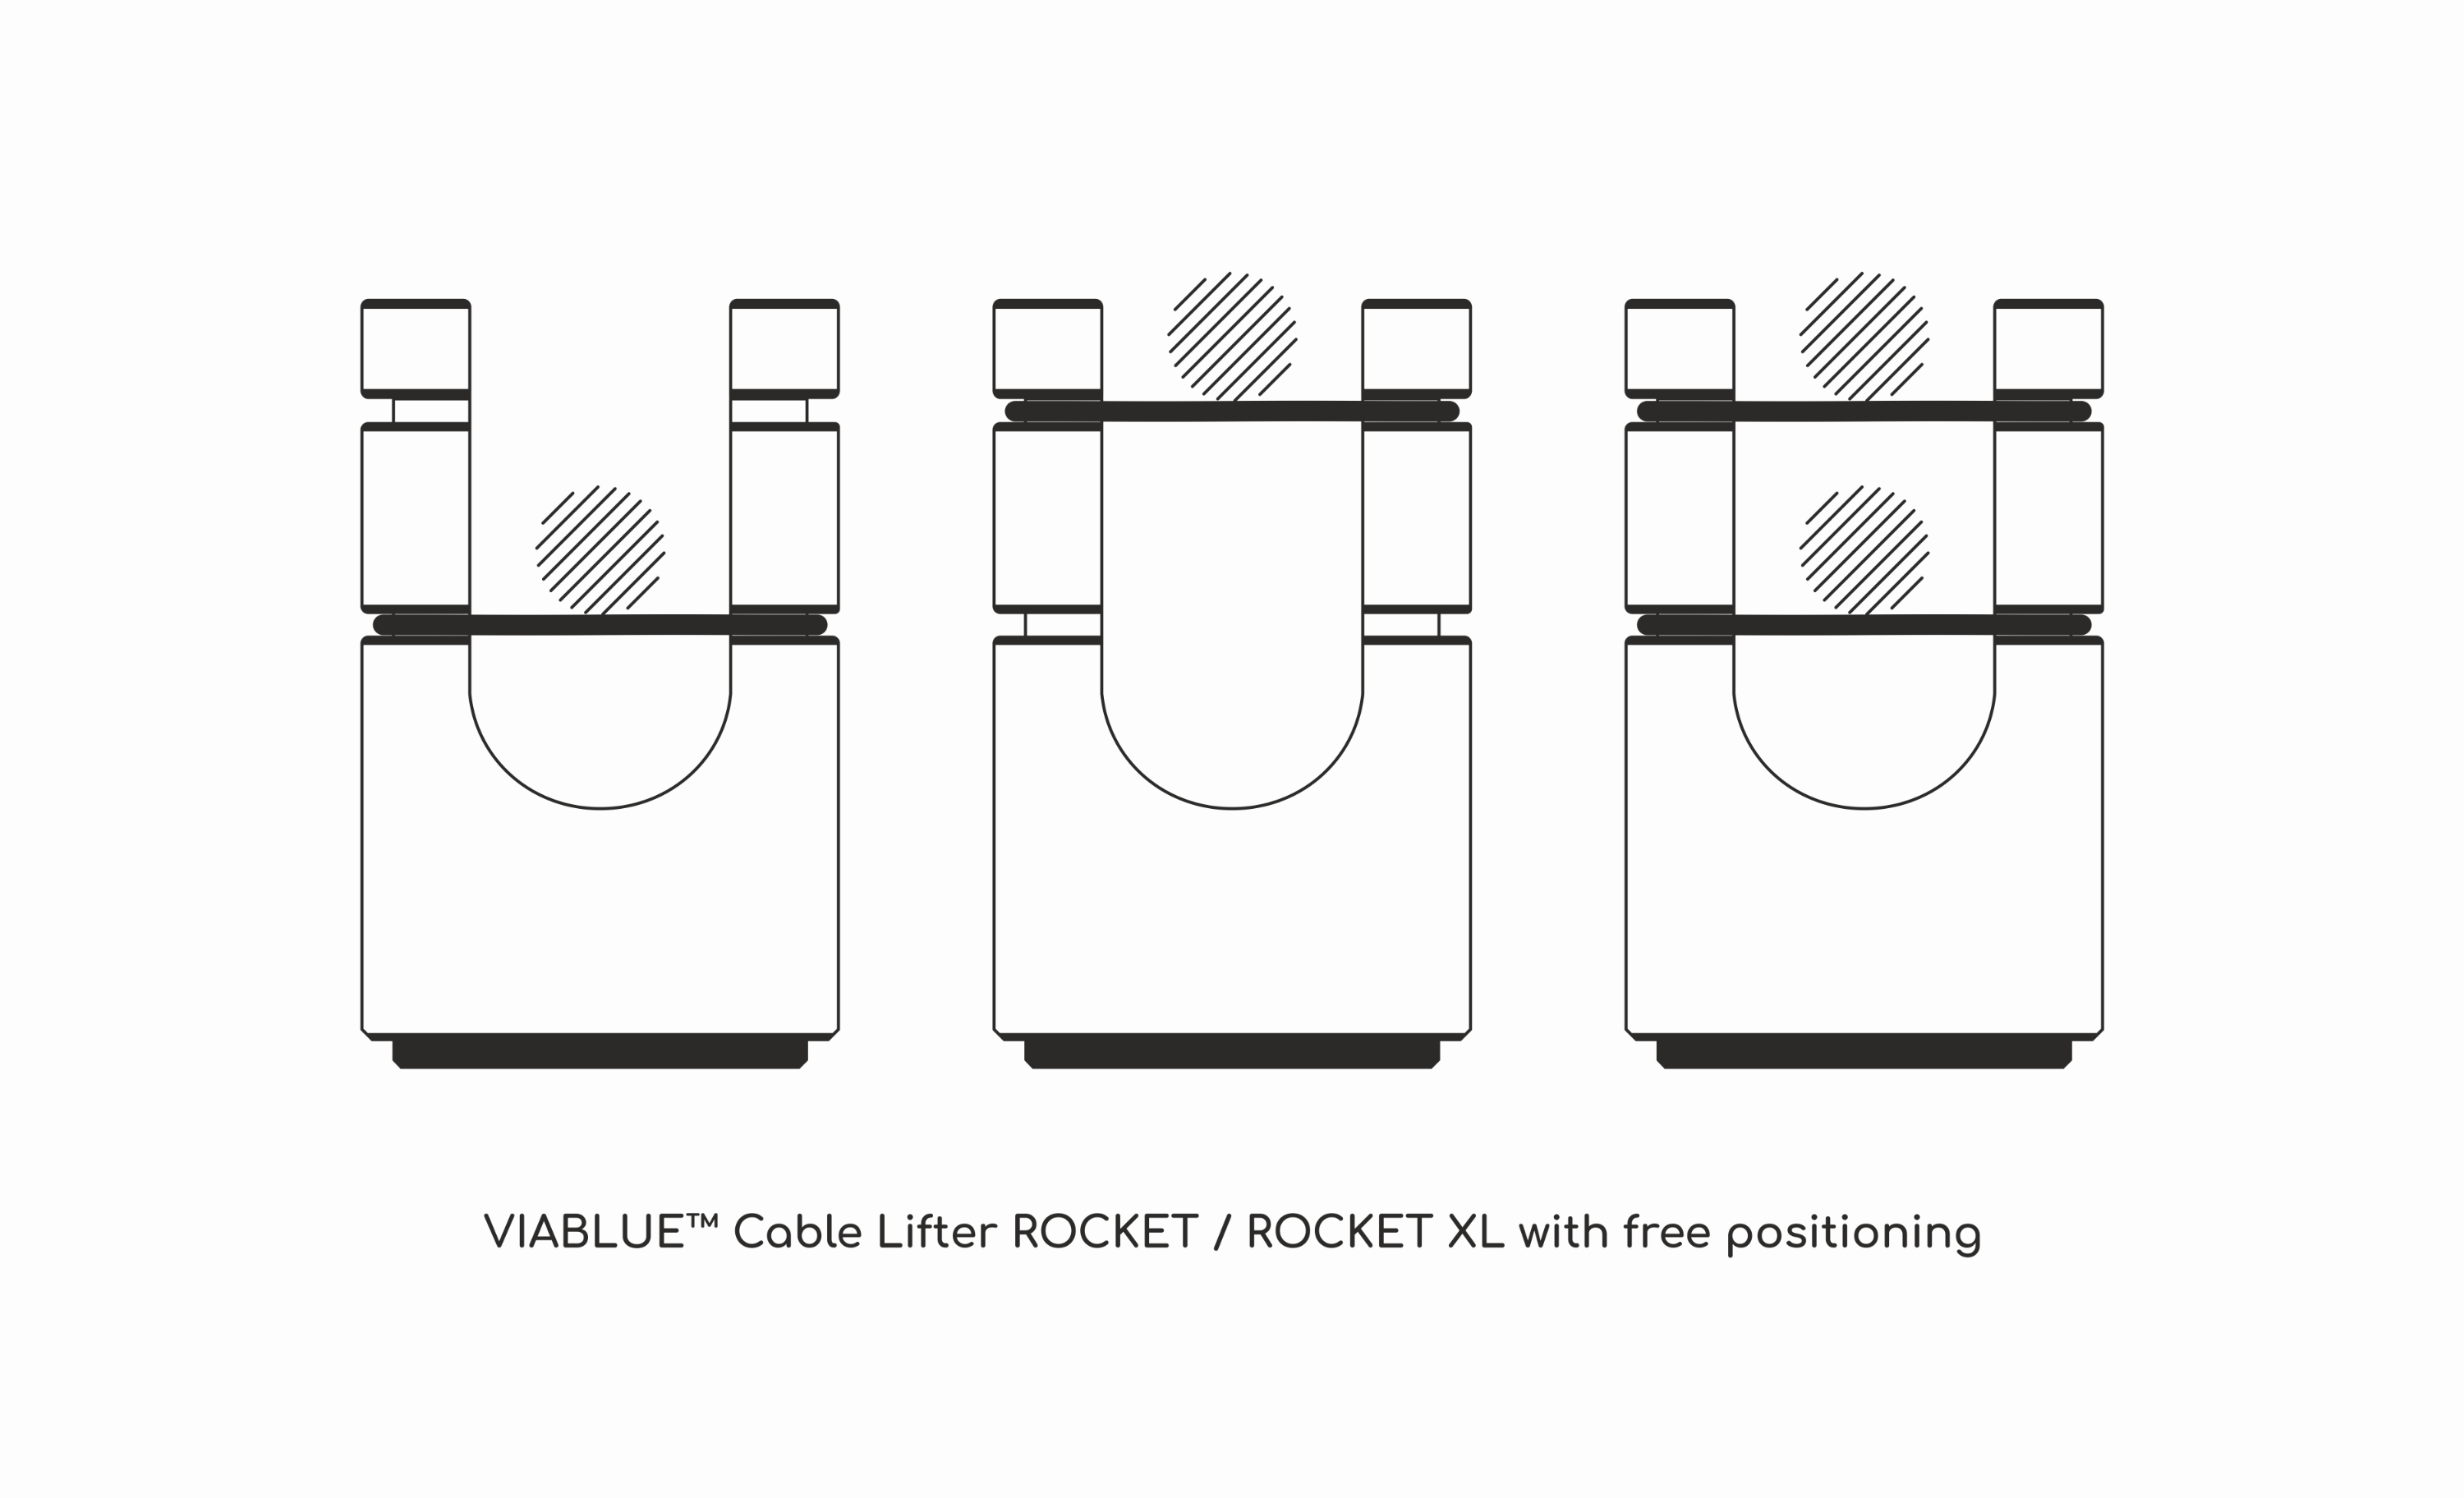 VIABLUE™ Cable Lifter ROCKET / ROCKET XL with free positioning